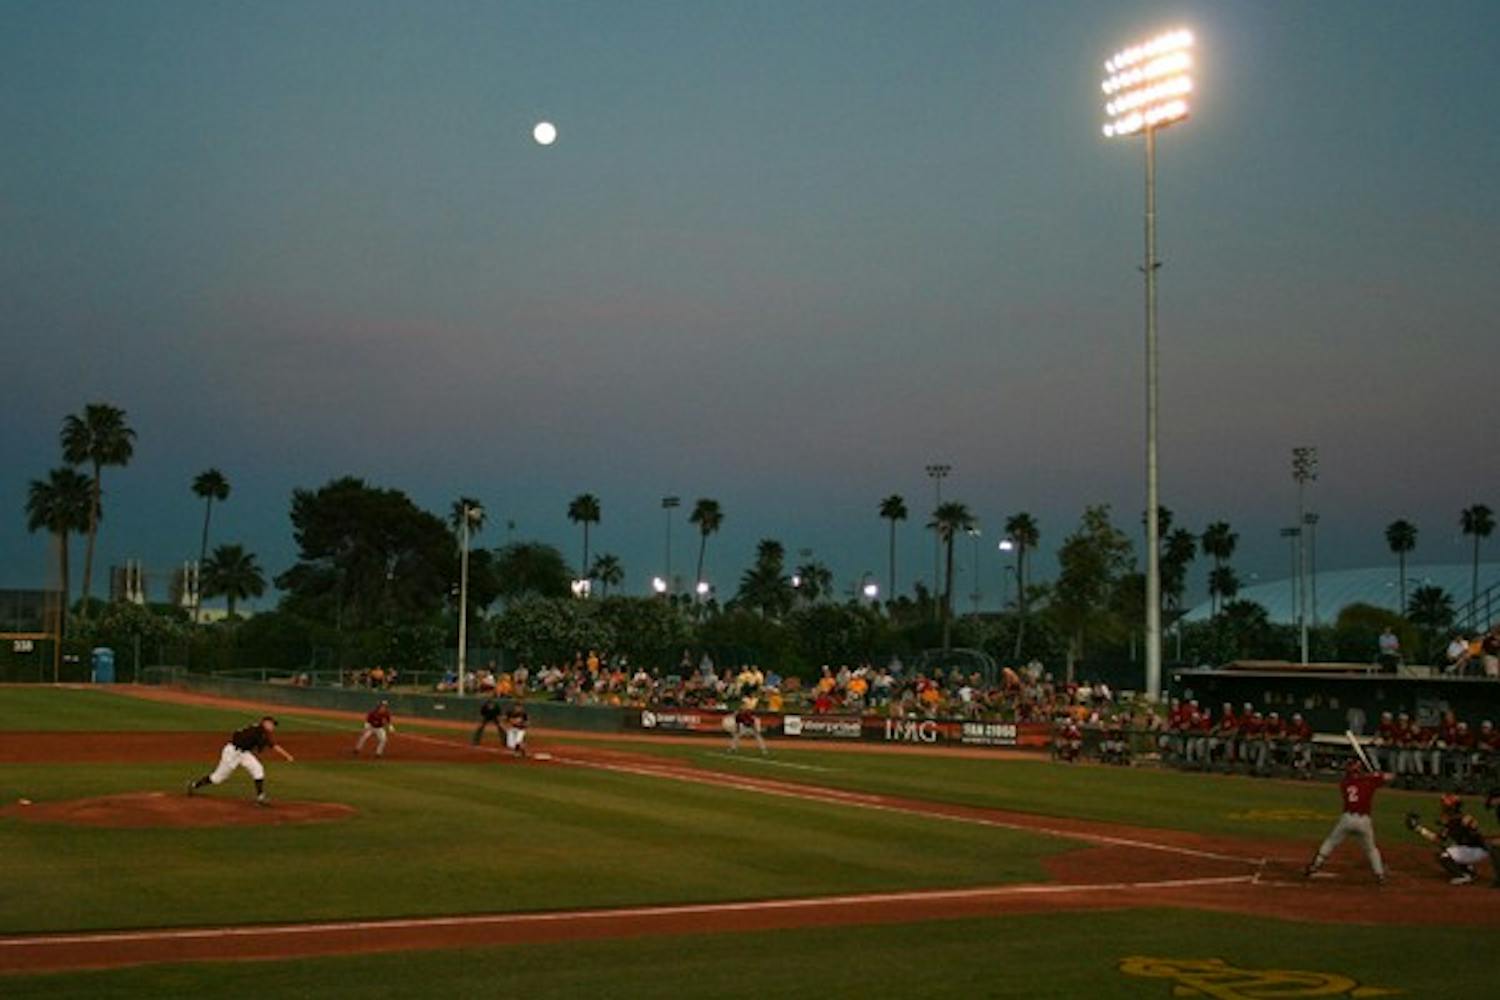 A PIECE OF HISTORY: The Packard Stadium on ASU's Tempe campus has hosted baseball since 1974. Recently, the team has considered practicing and playing at other venues such as the Tempe Diablo Stadium and Hohokam Park. (Photo by Lisa Bartoli)